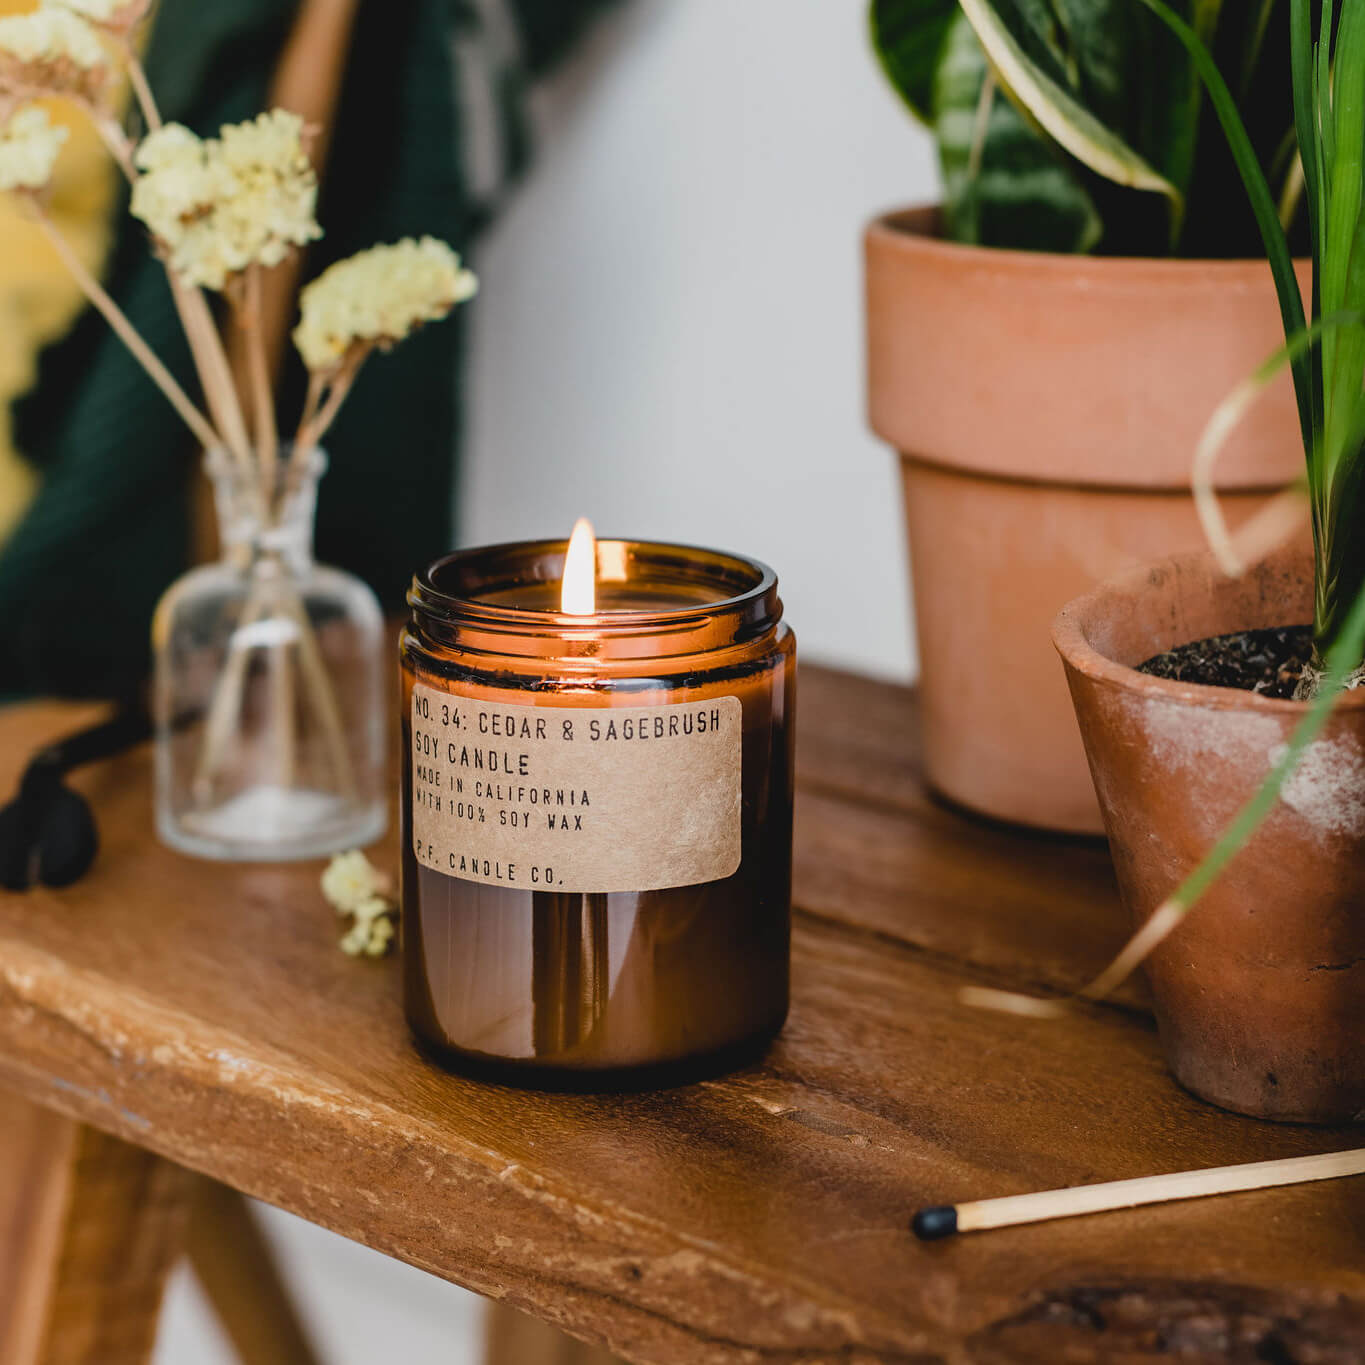 Candles Scents And Sensibility: Aromatherapy In Home Design